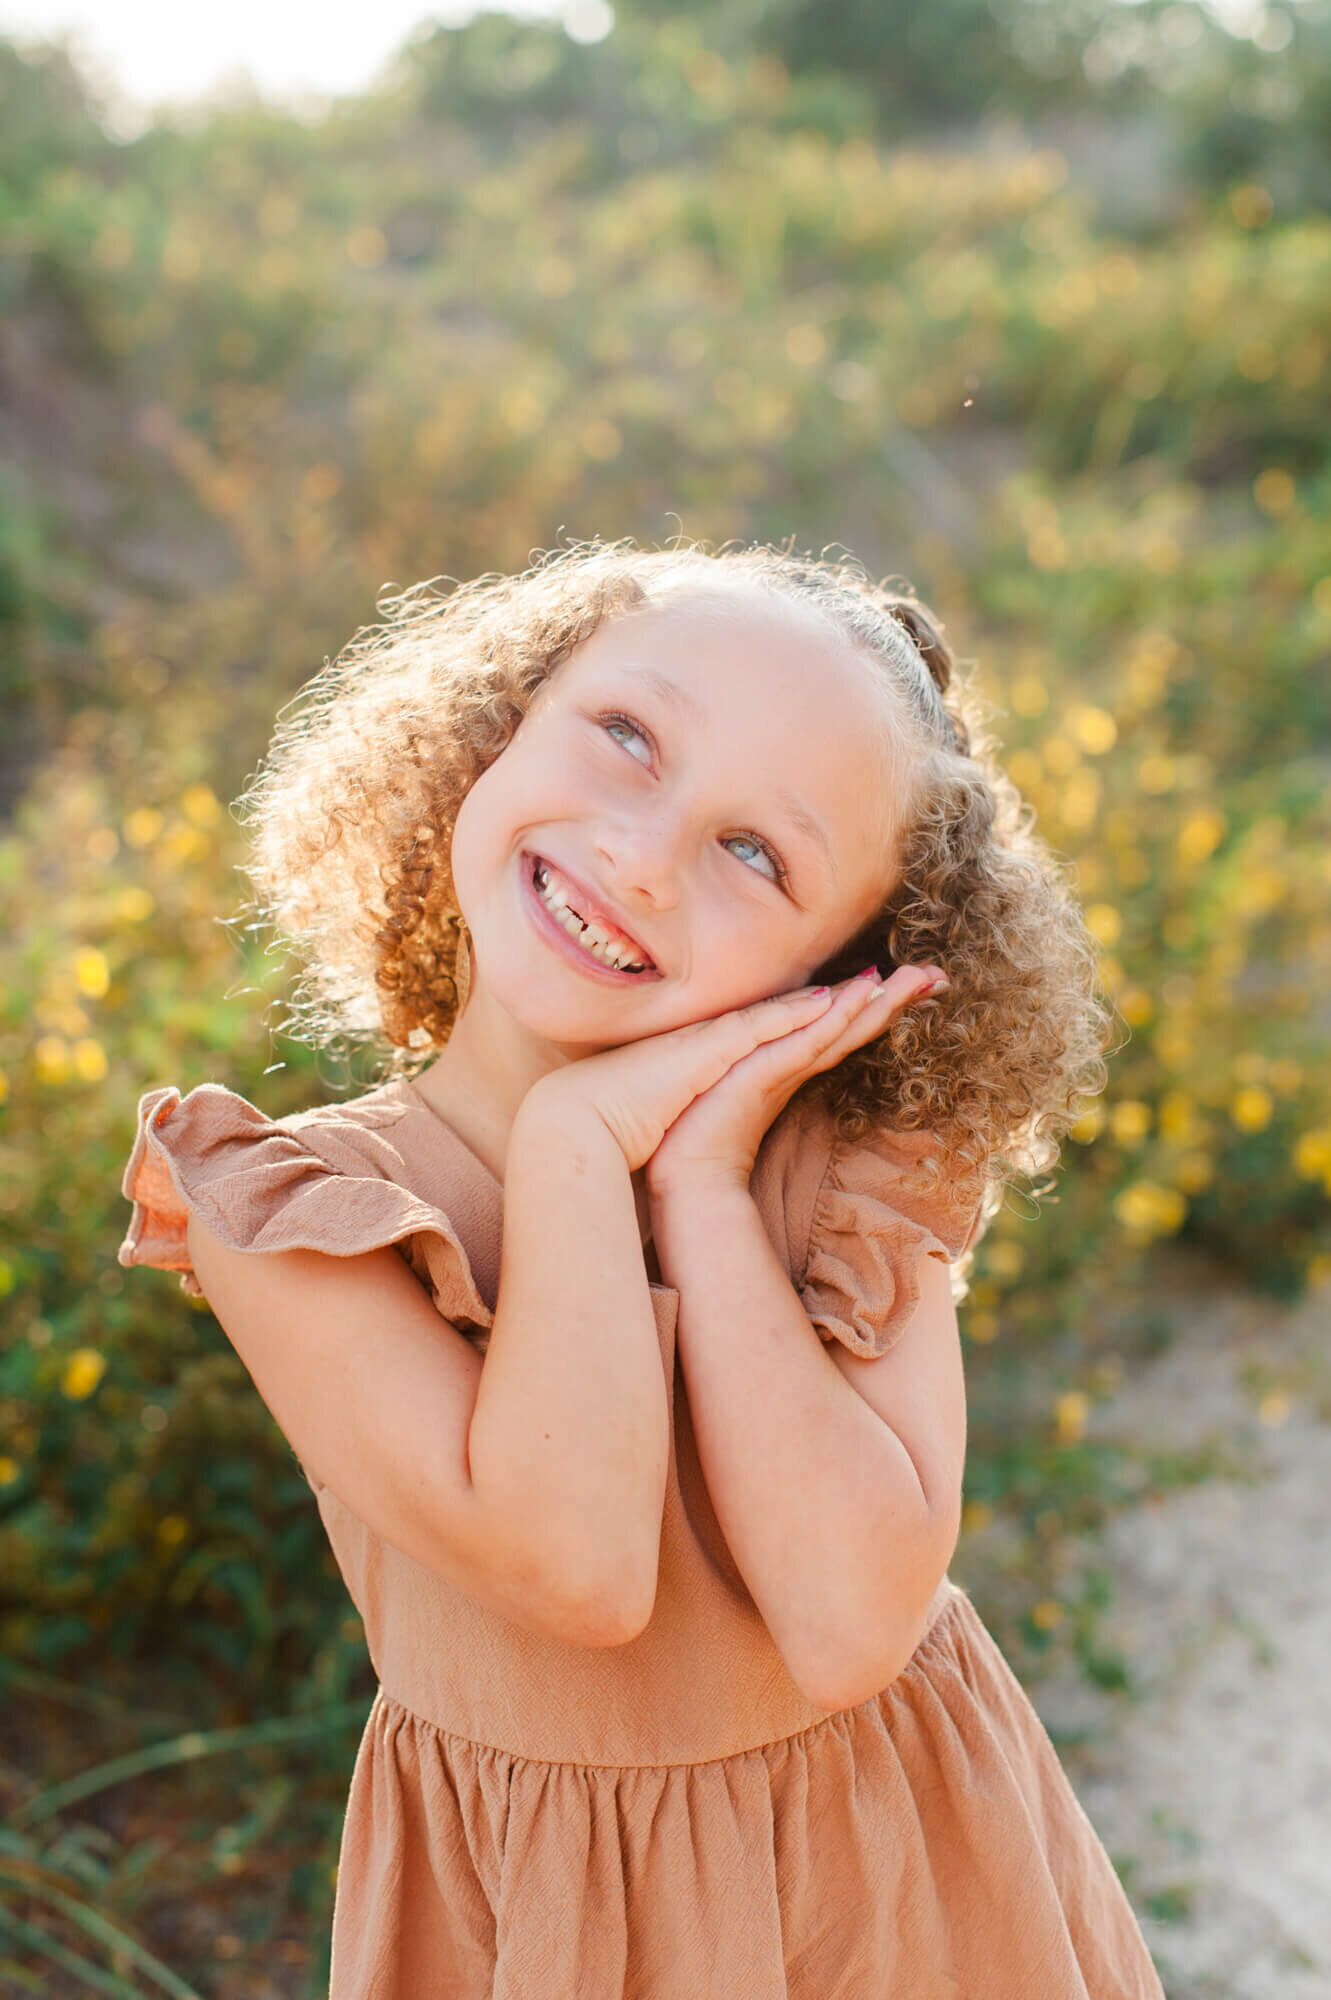 Young girl smiling and posing near beautiful yellow flowers at sunset